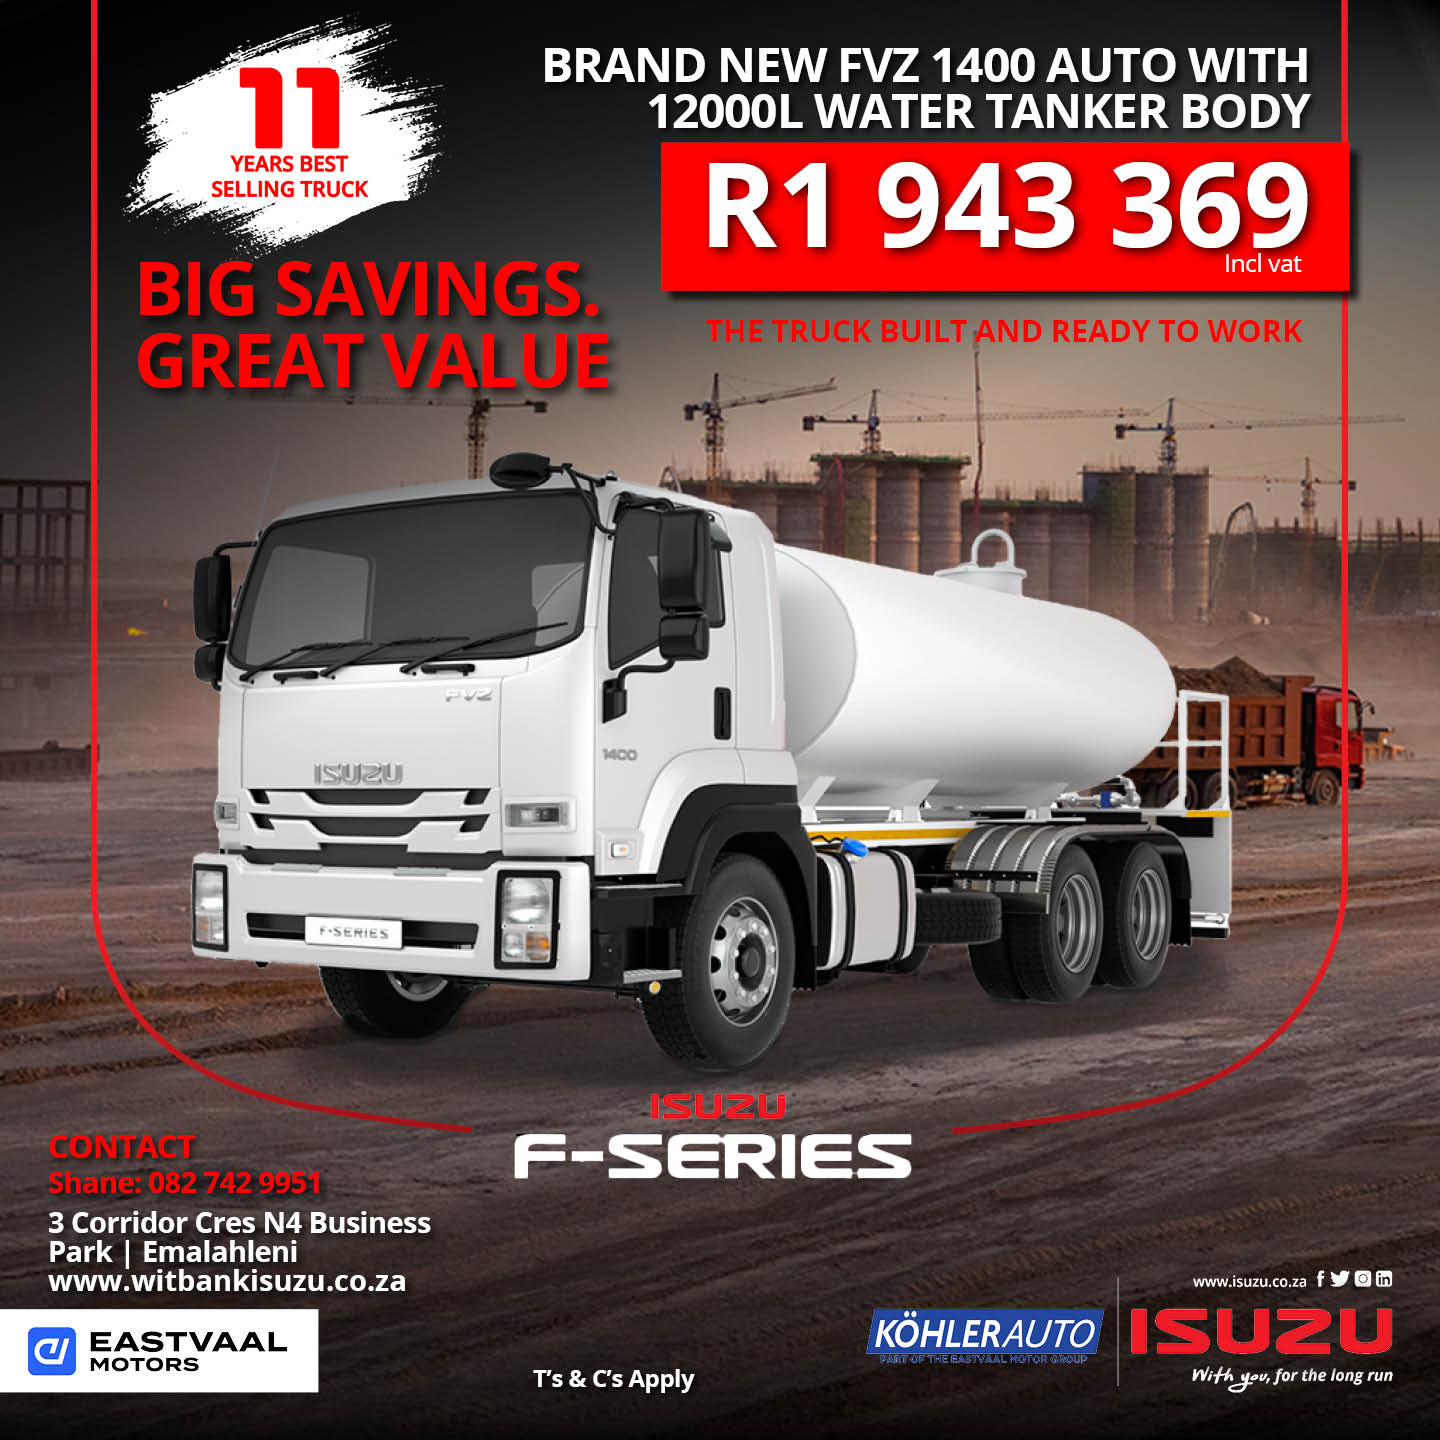 Brand new FVZ 1400 Auto (12000 L water tanker body) image from 